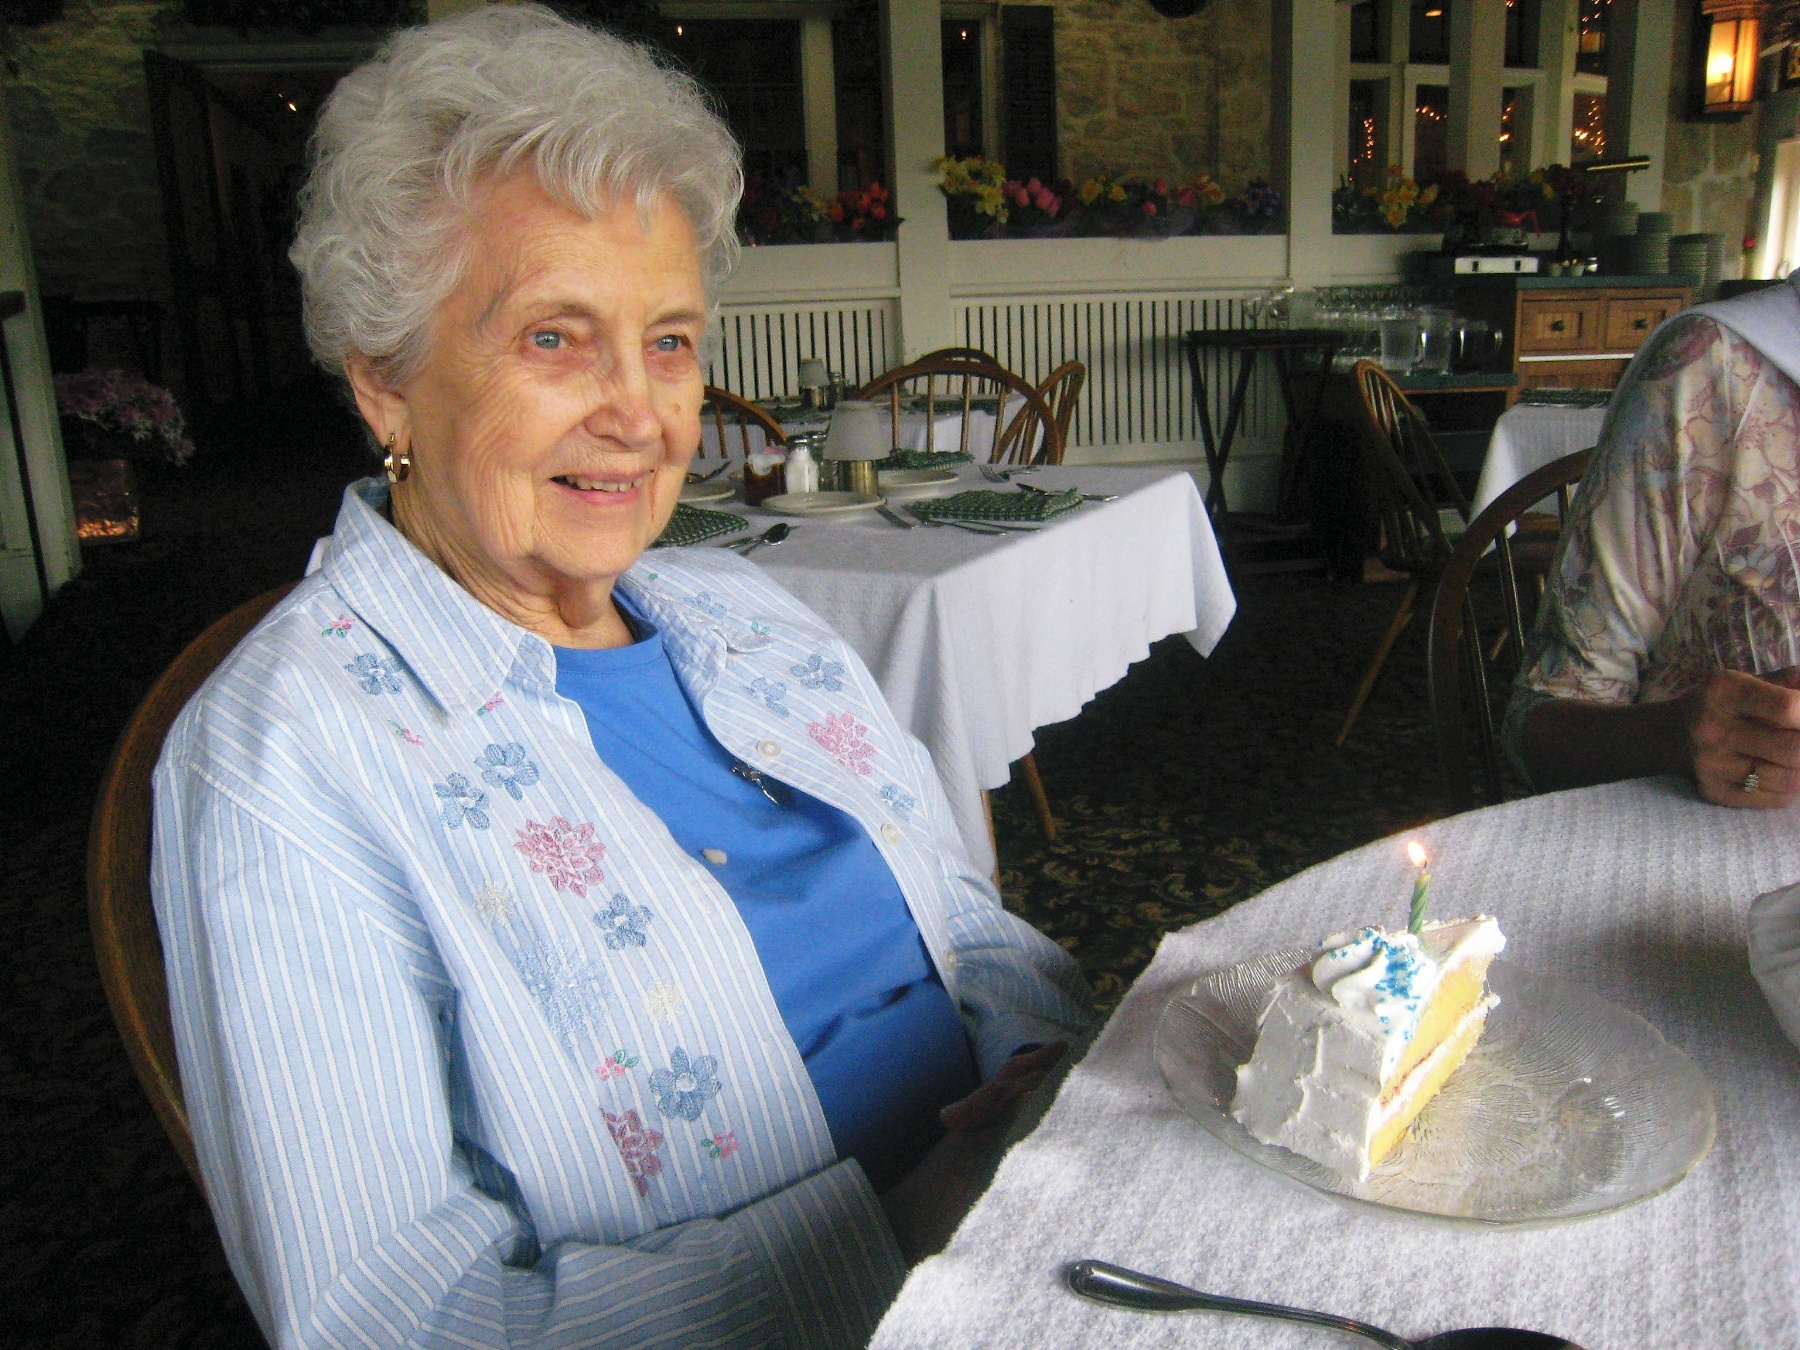 Flo turns 94 today. She’s having her cake and eating it, too.